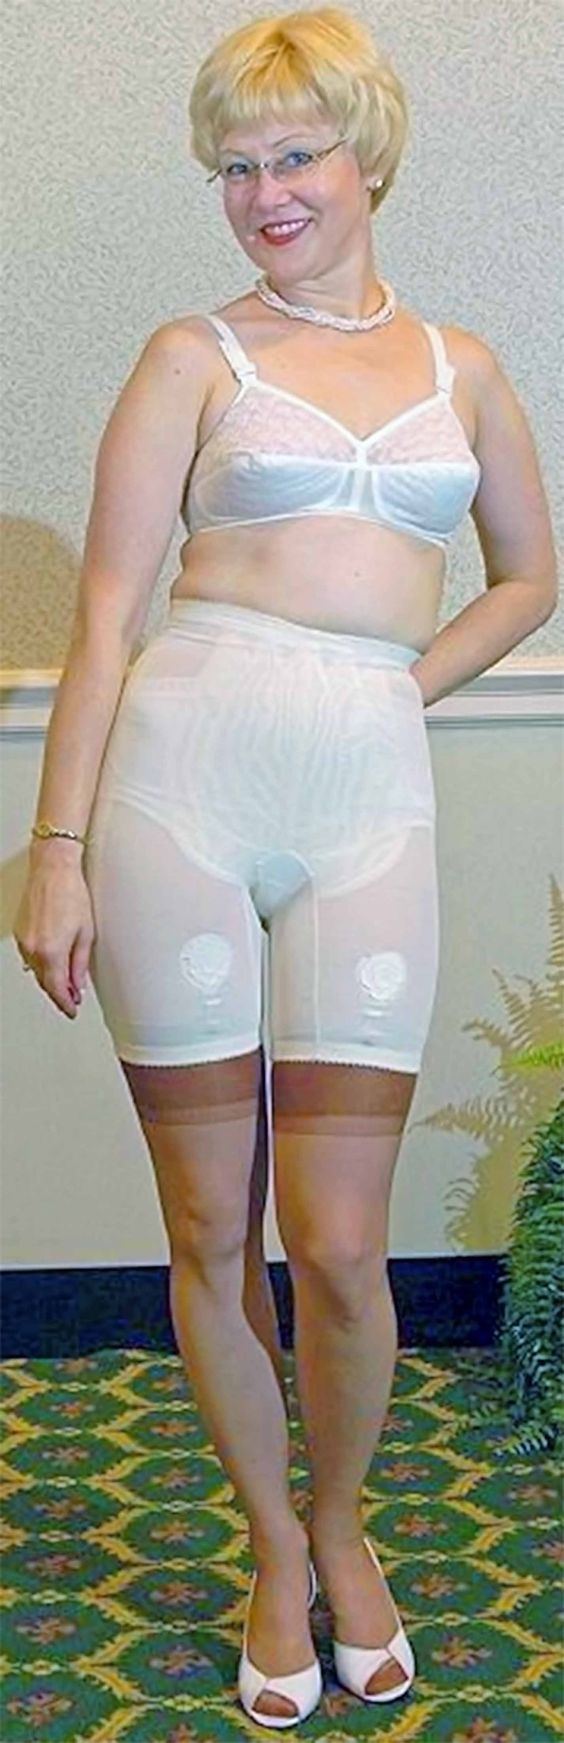 HB recomended Mature dominant women in girdles